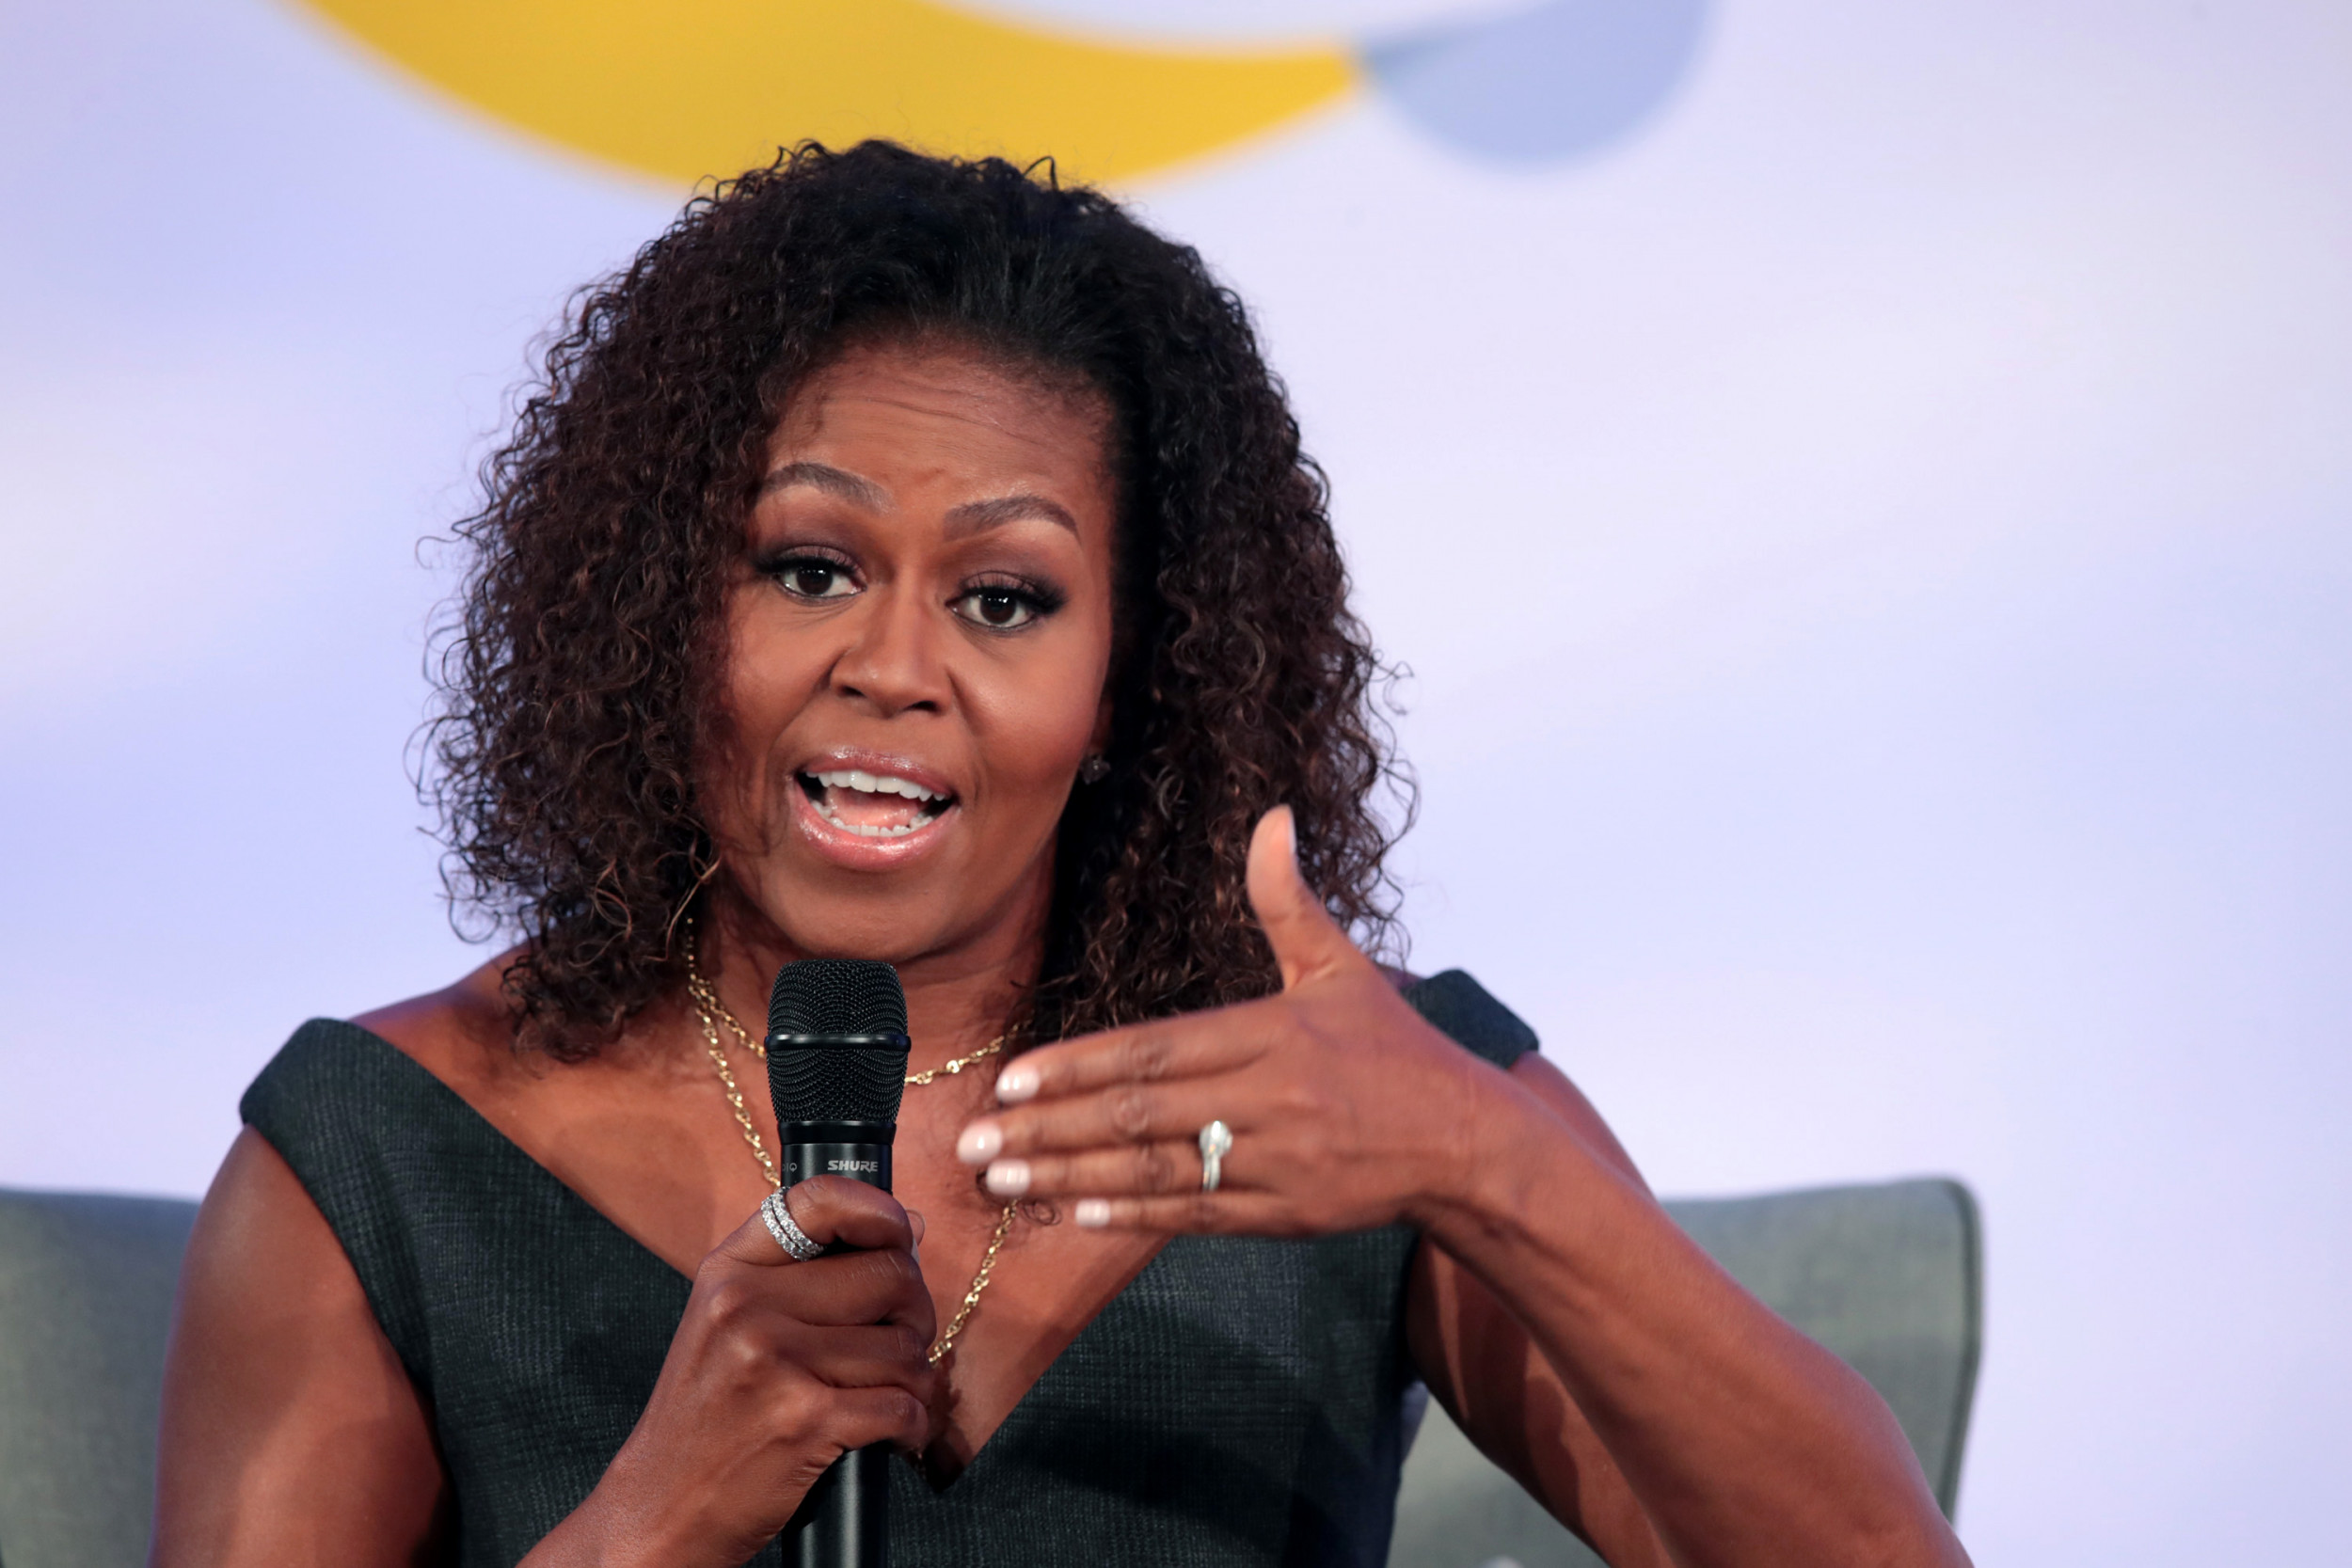 2016 Michelle Obama Porn - Michelle Obama news & latest pictures from Newsweek.com